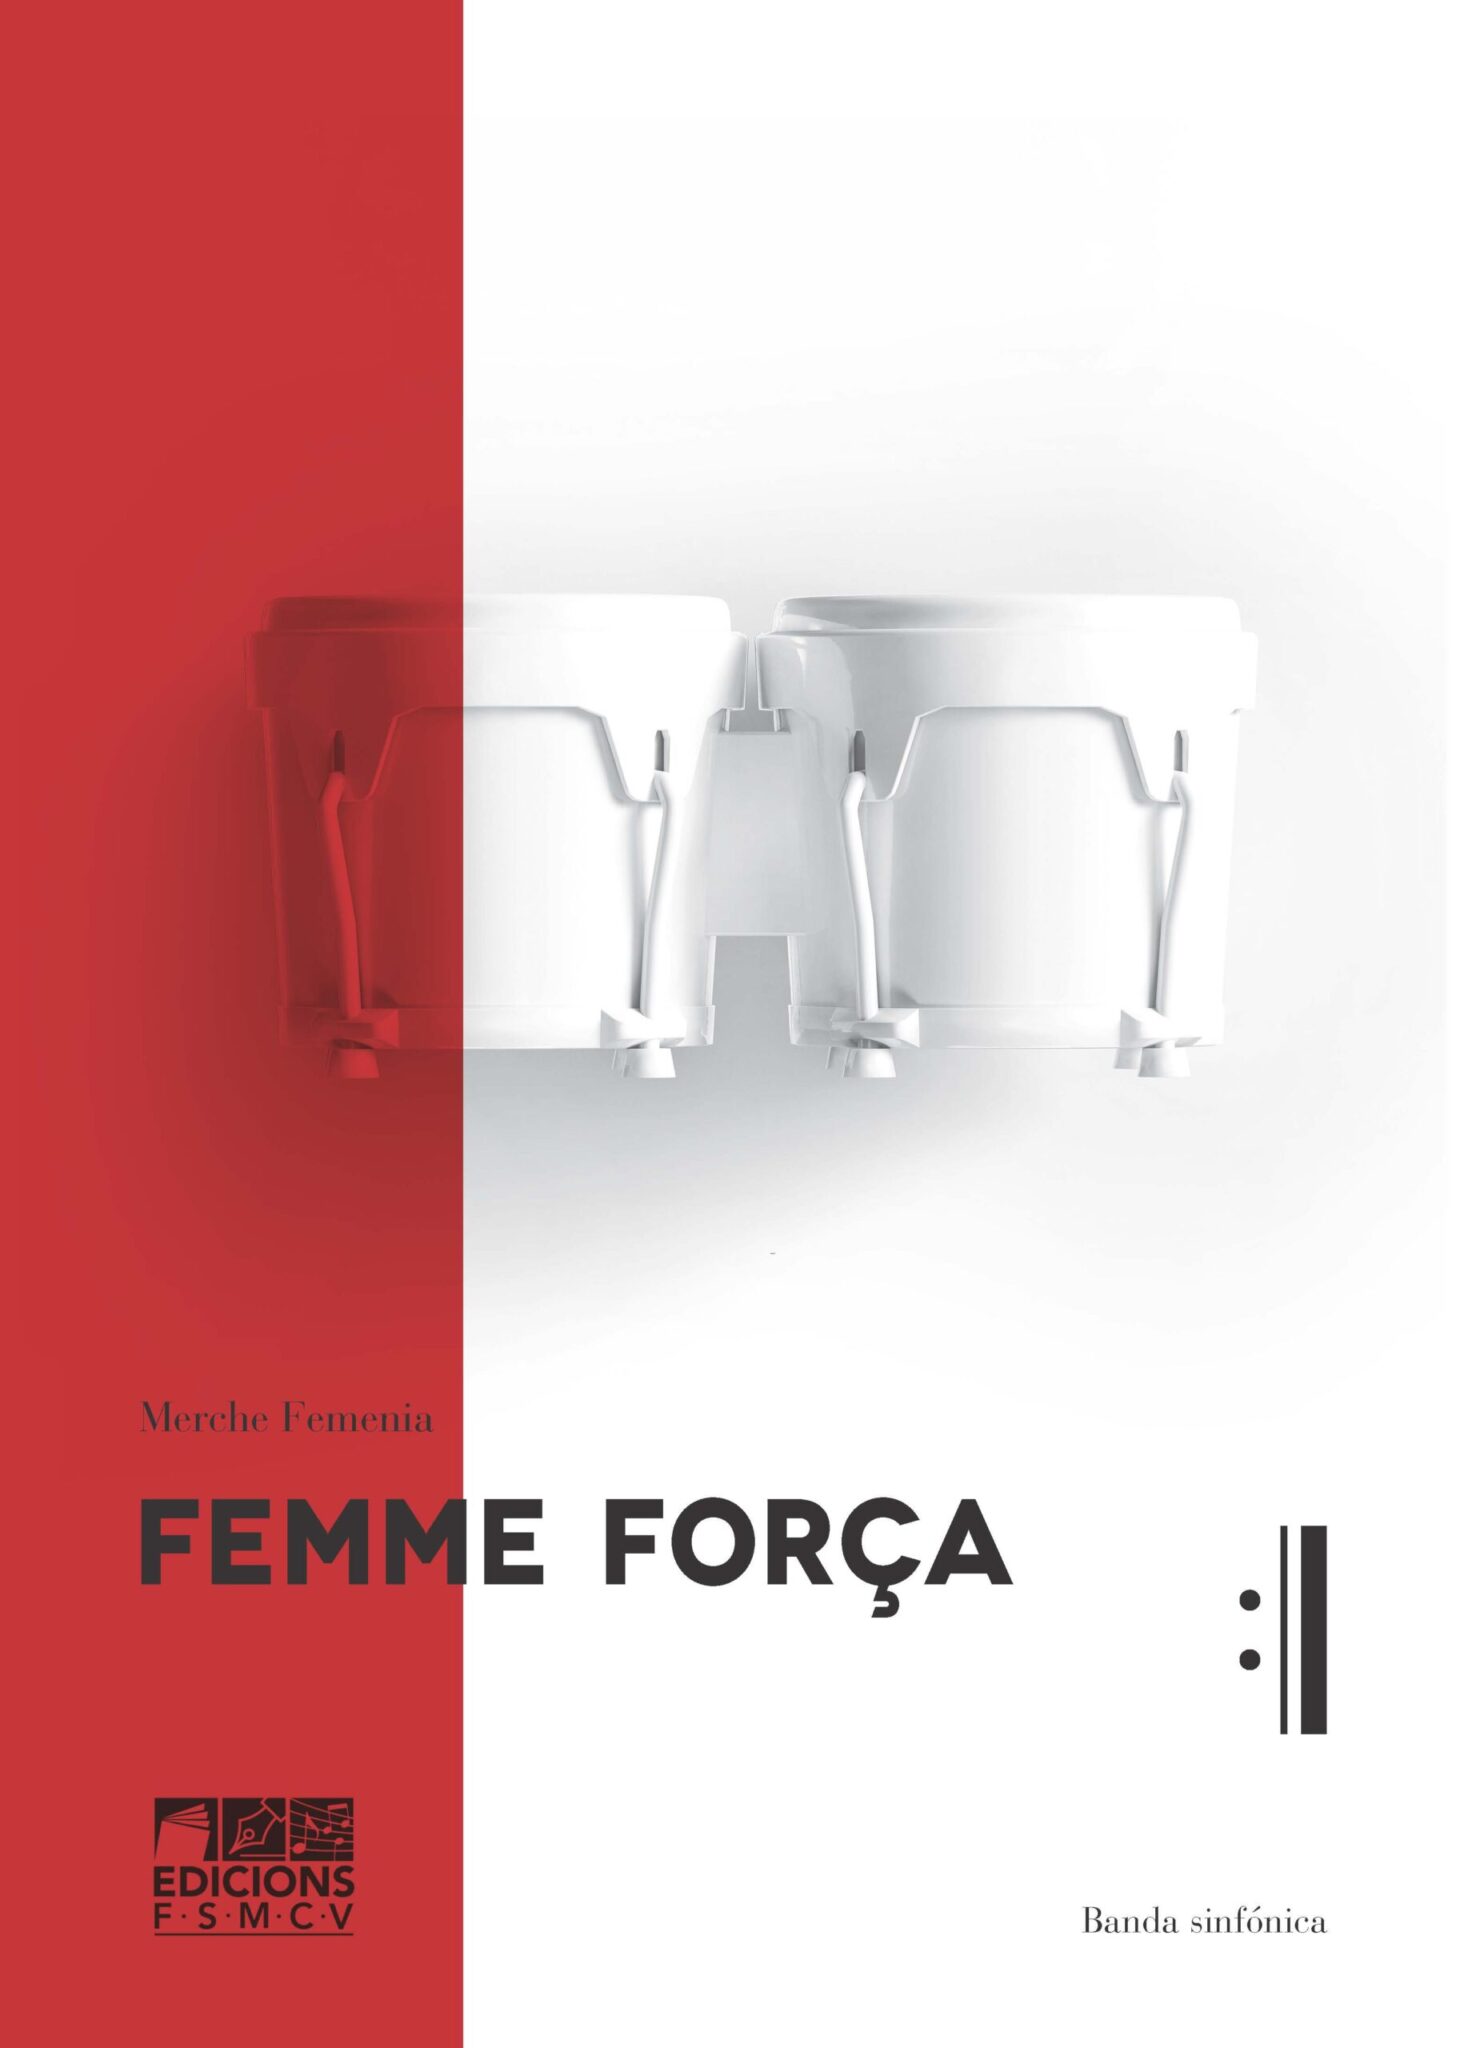 23. FERMME FORCA scaled scaled